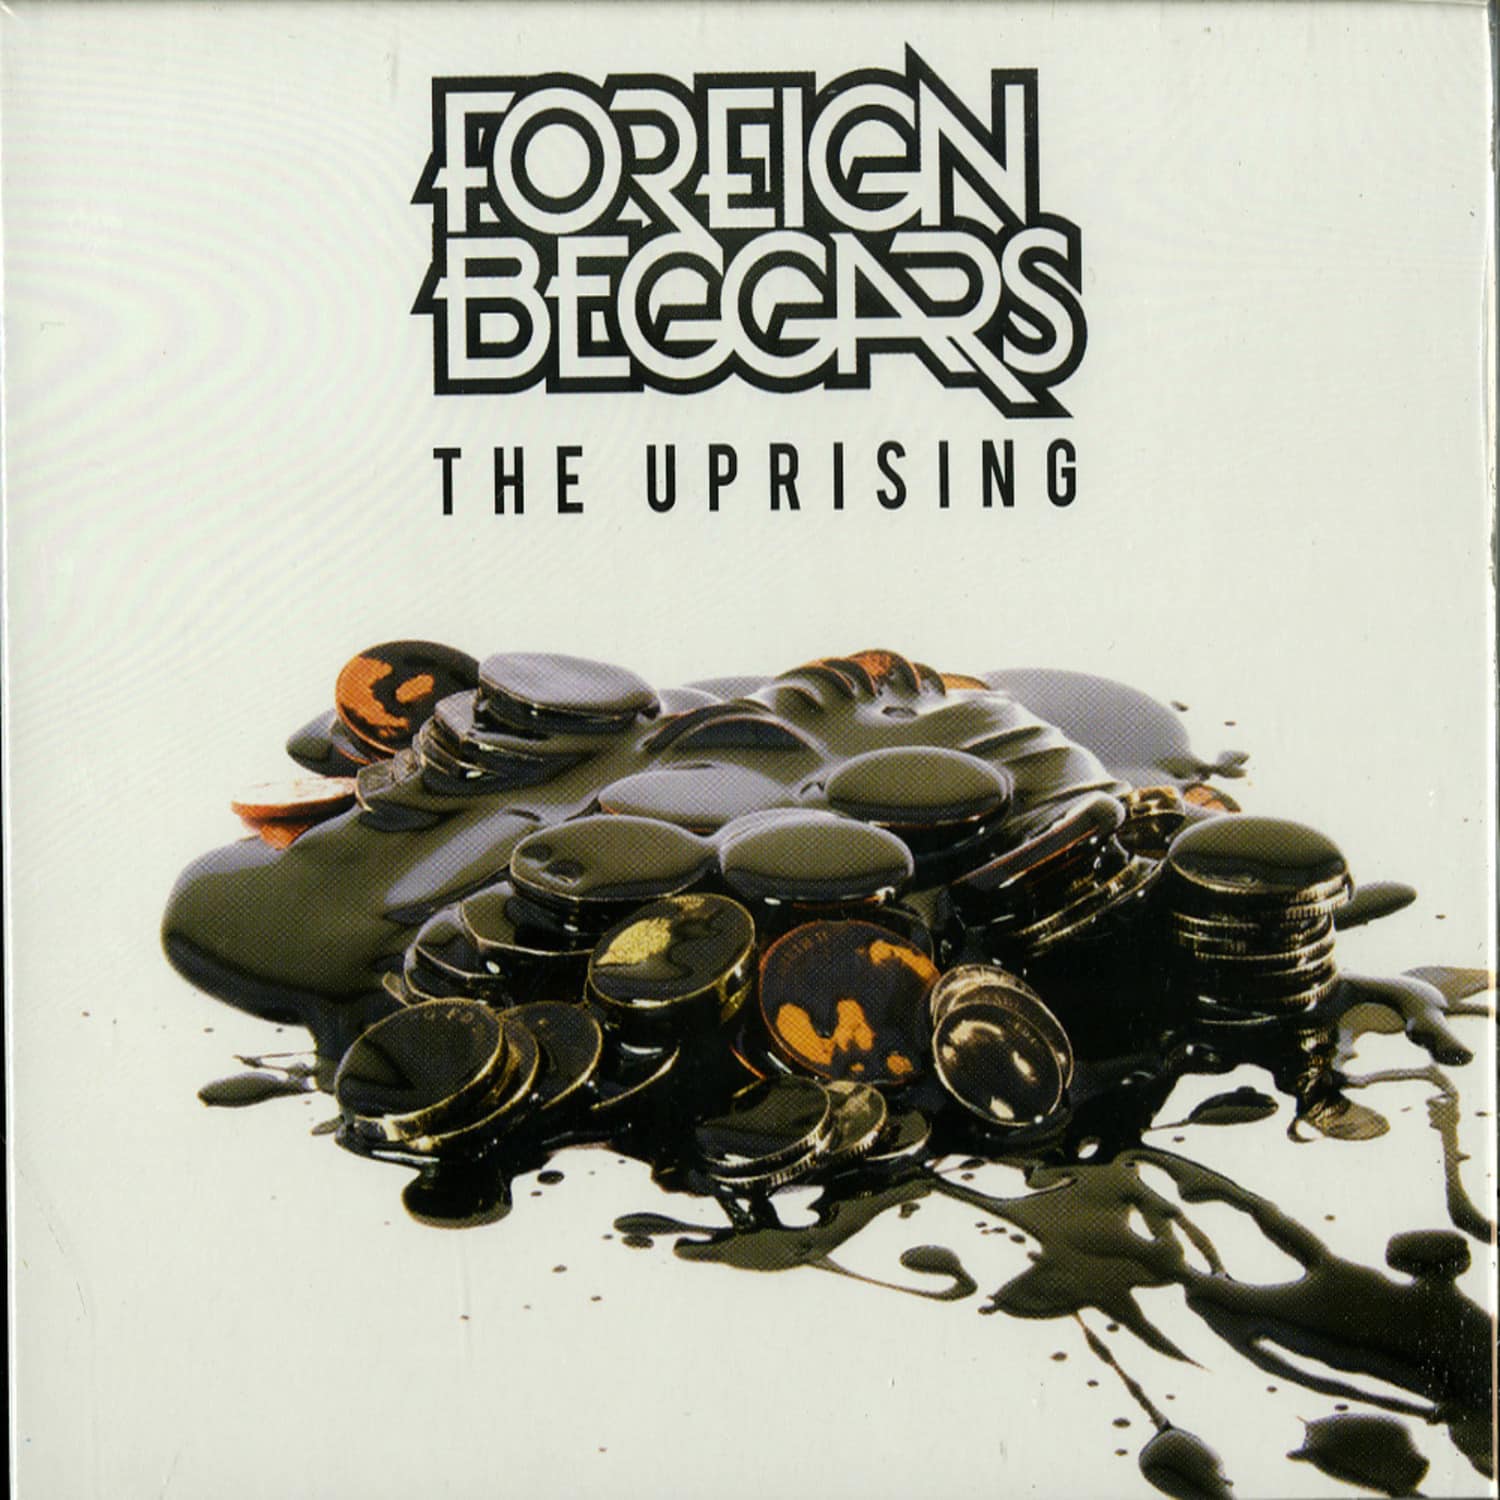 Foreign Beggars - THE UPRISING 